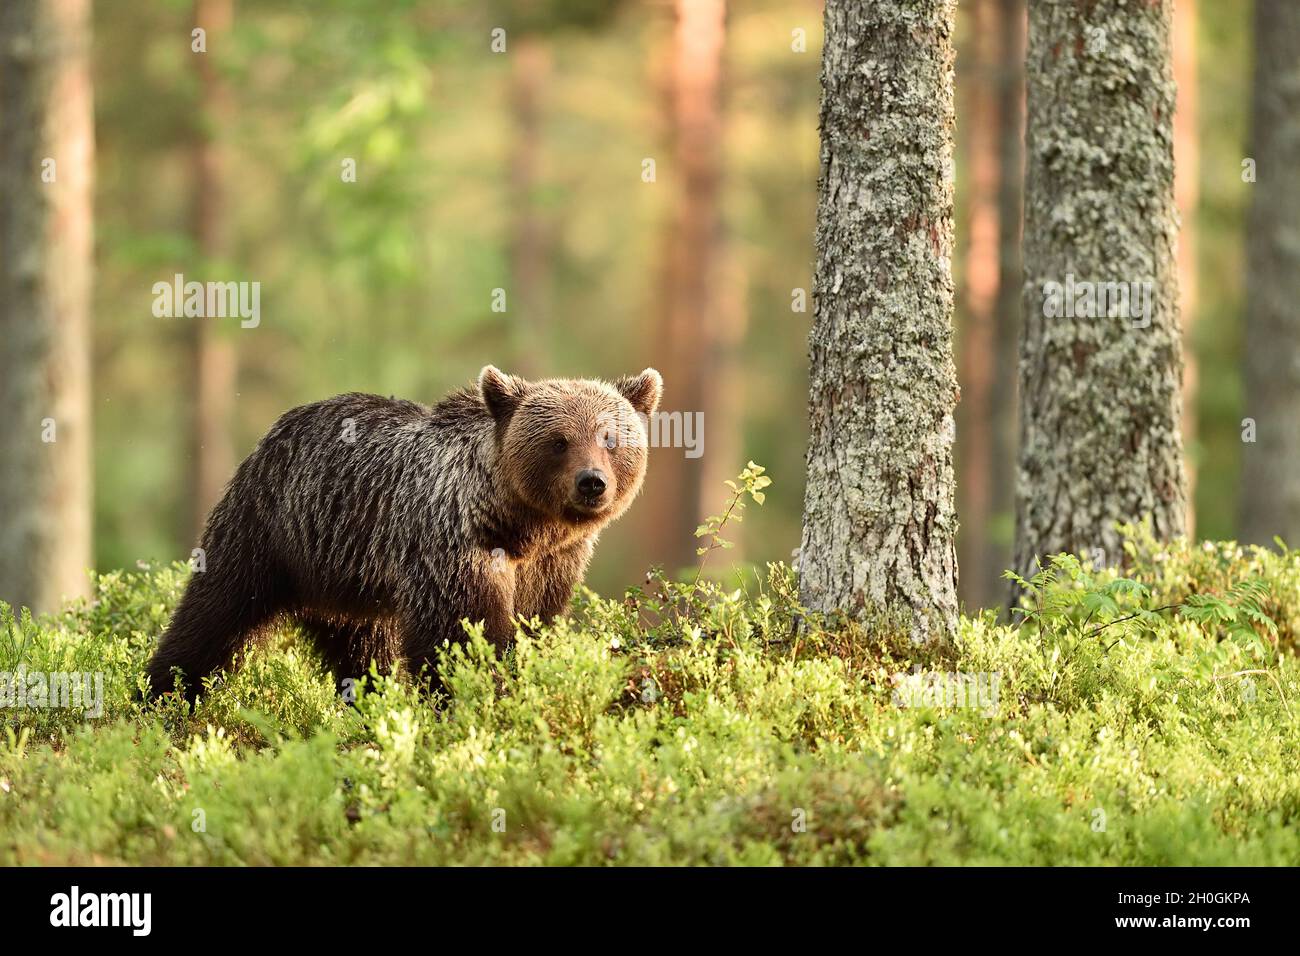 young brown bear in forest scenery Stock Photo